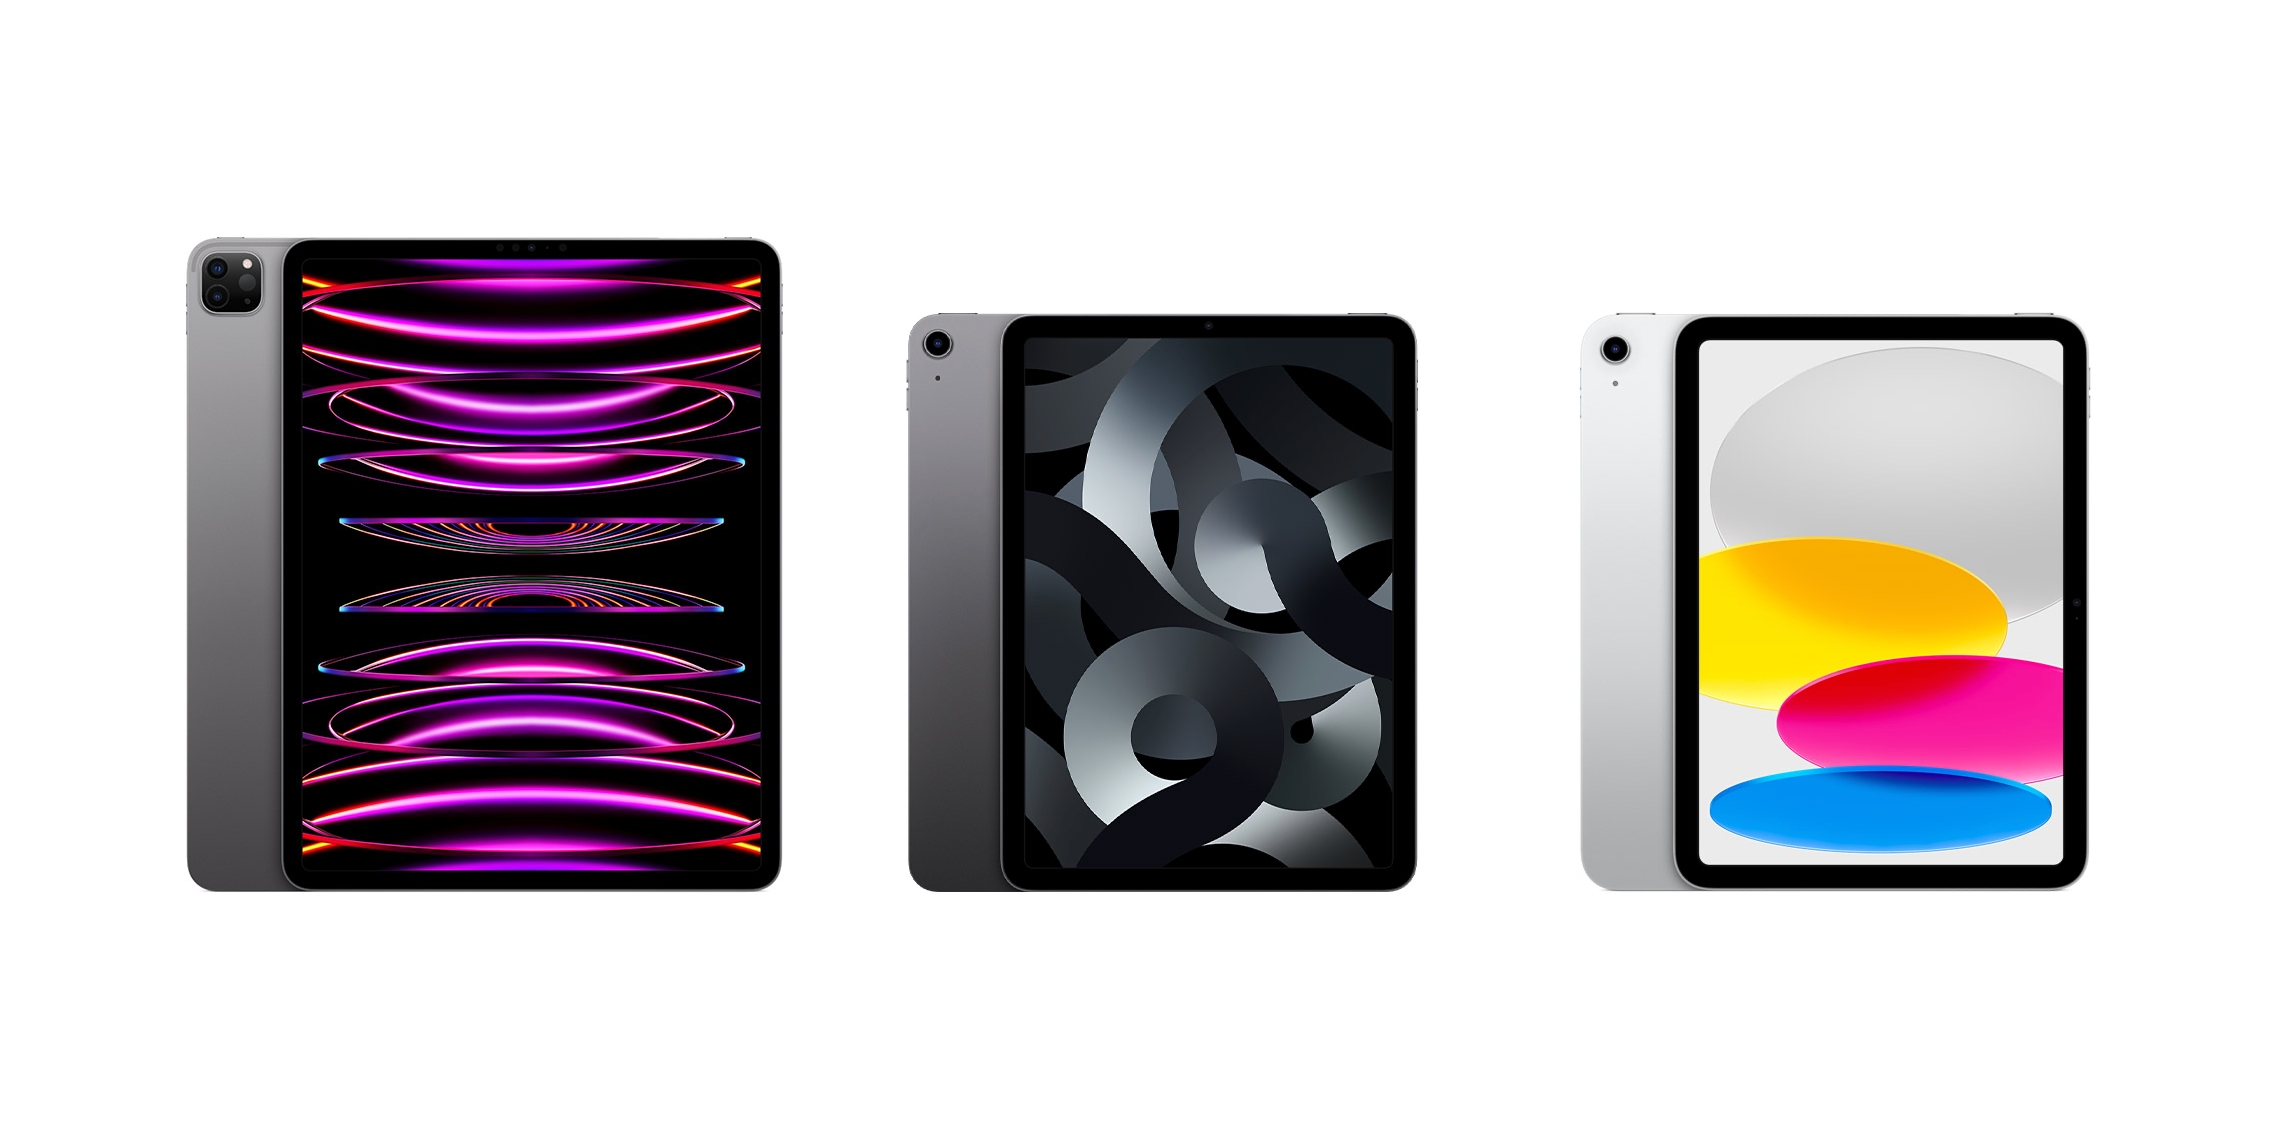 Kuo: Apple to update all iPad models next year, including OLED